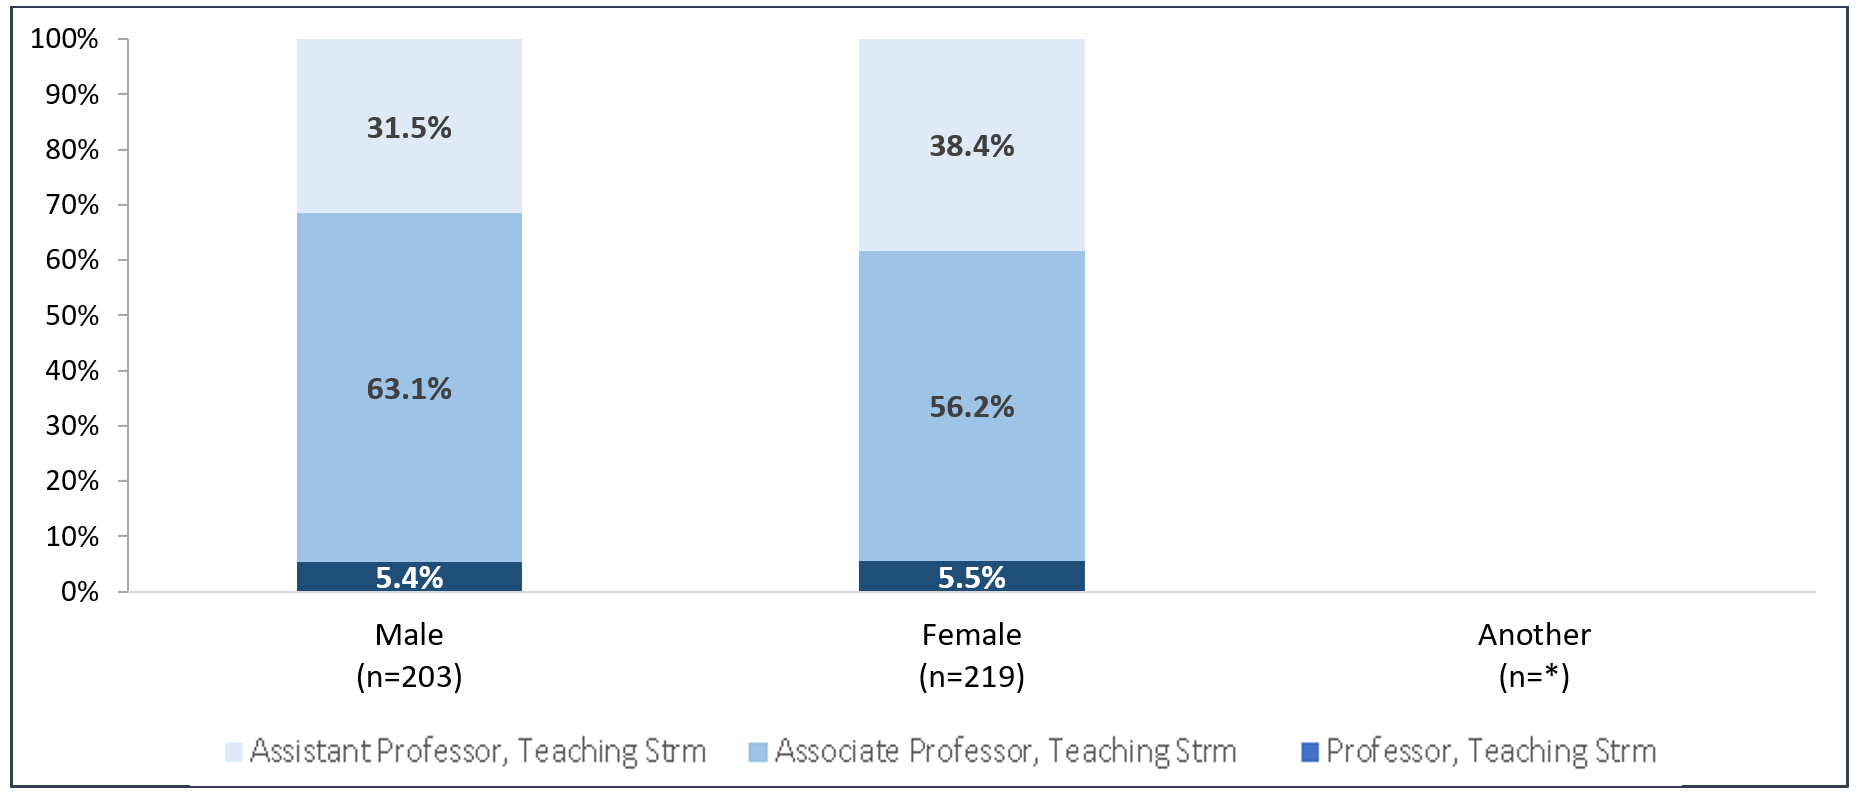 Figure 11: Continuing Stream, Teaching Stream Faculty by Sex, by Rank, 2020-21.